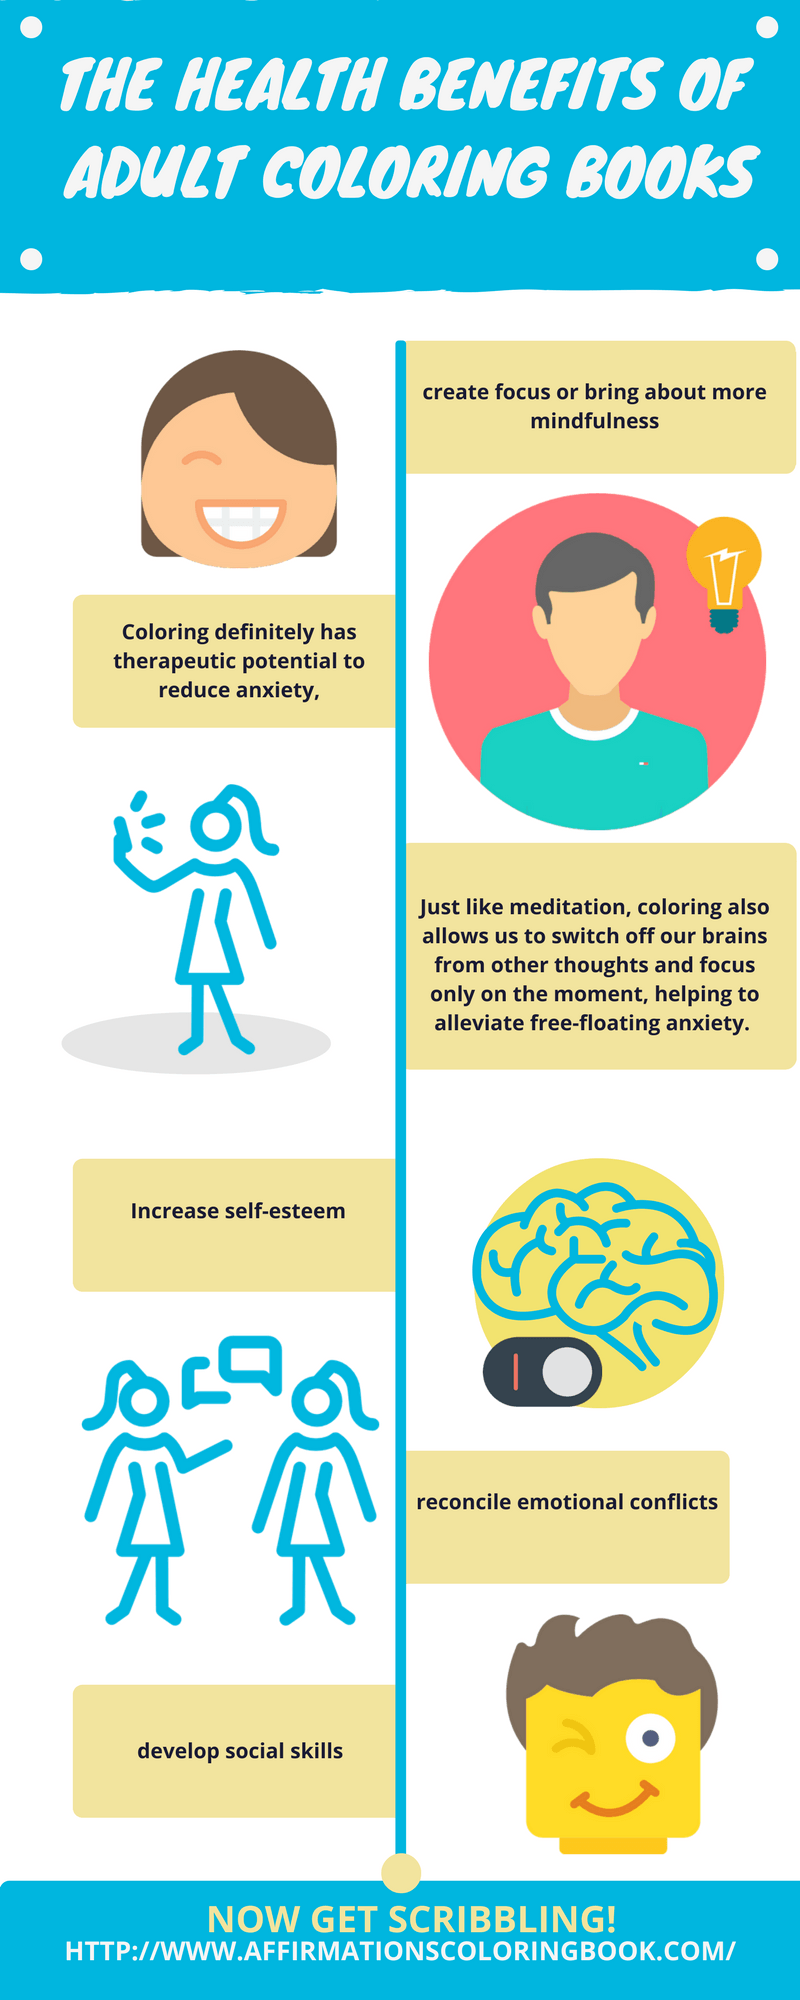 The Health Benefits of Adult Coloring Books Infographic - e-Learning